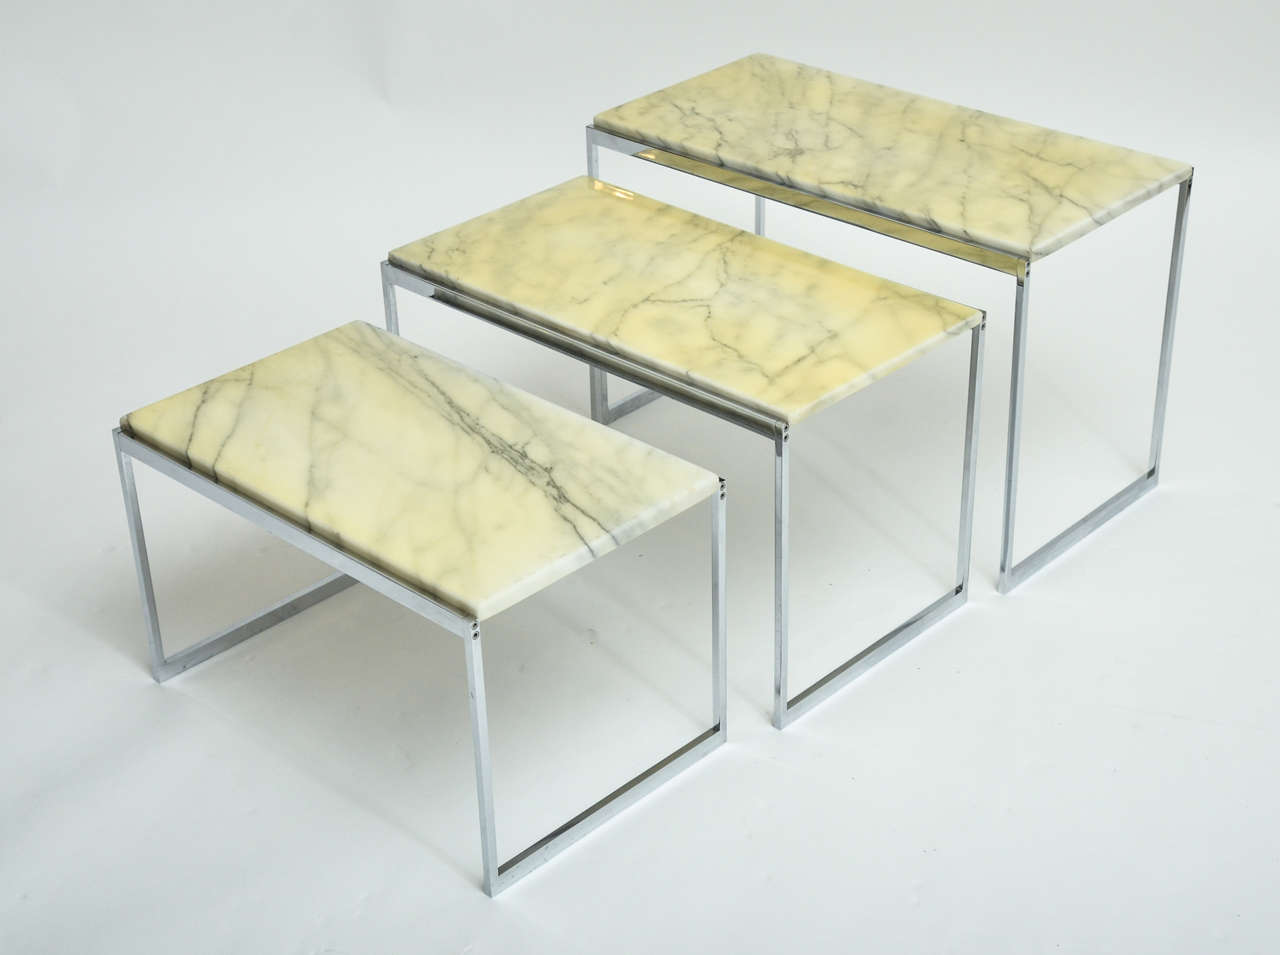 1970s Italian chrome and marble nest of three tables with original marble. Dimensions listed are for largest table.